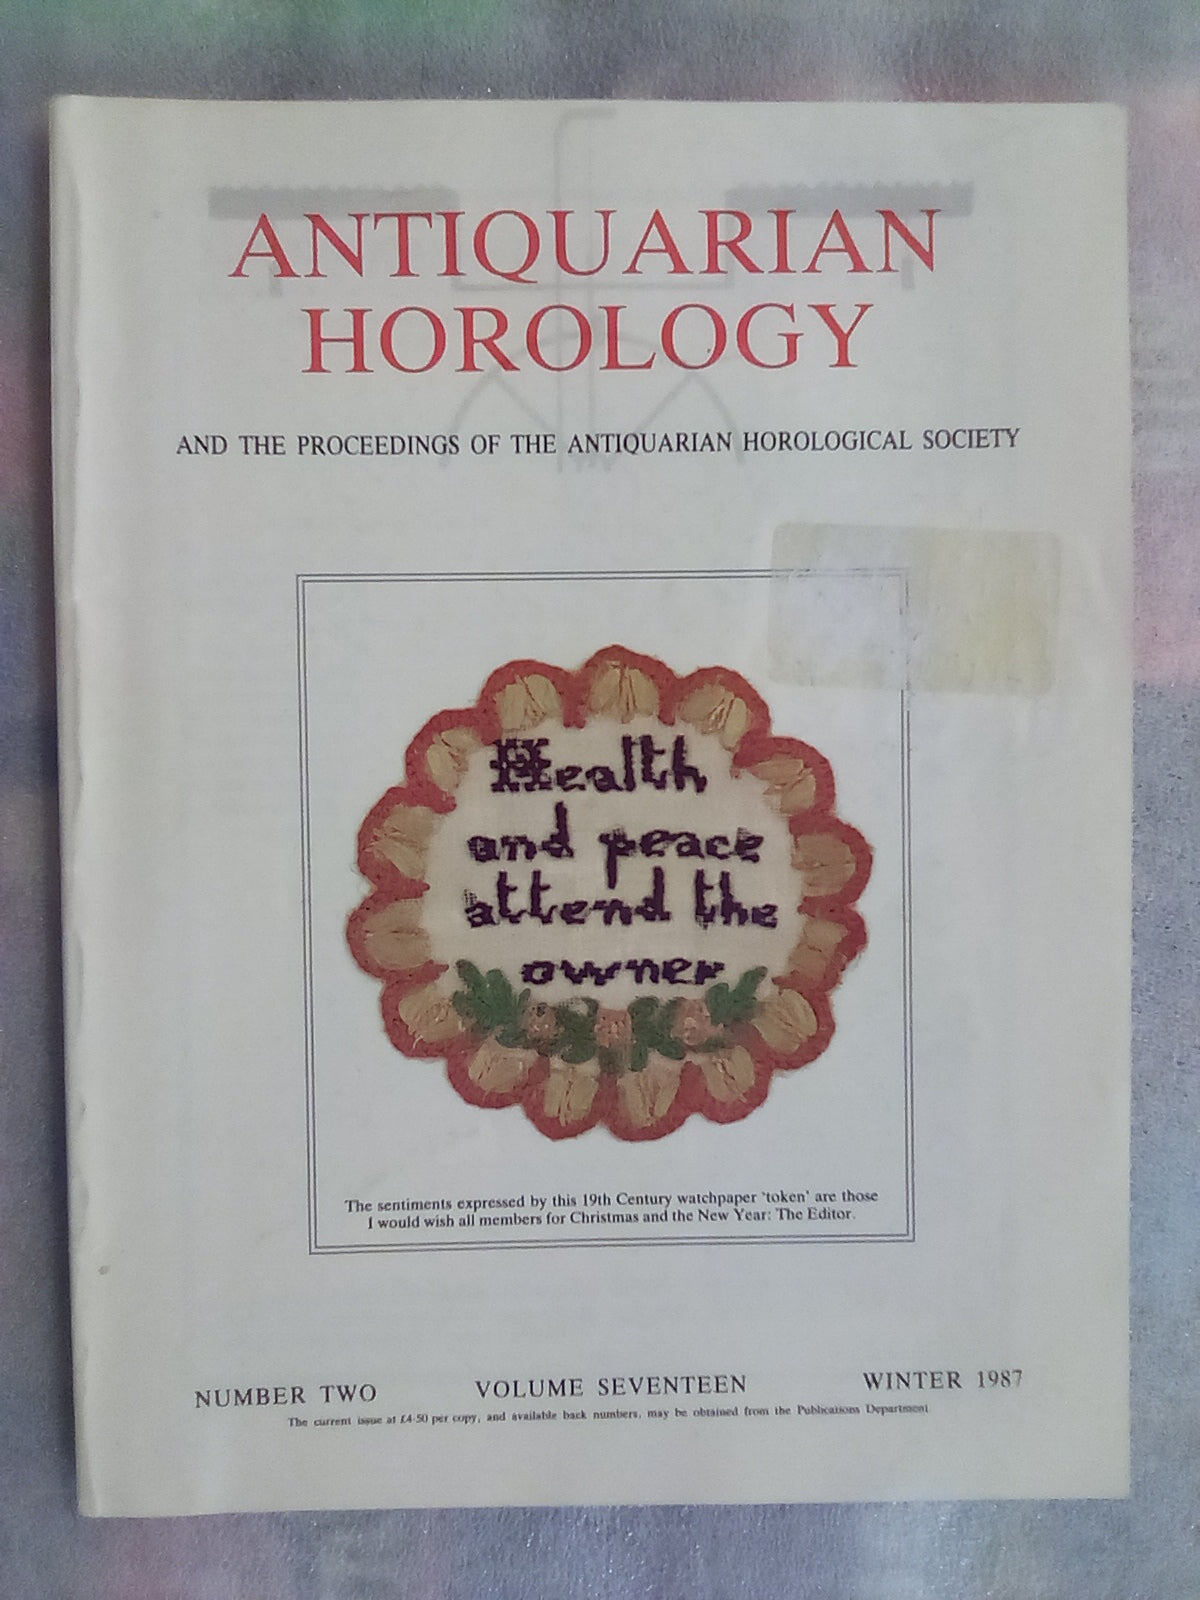 Antiquarian Horology Journal - 6 Issues from 1986-1987